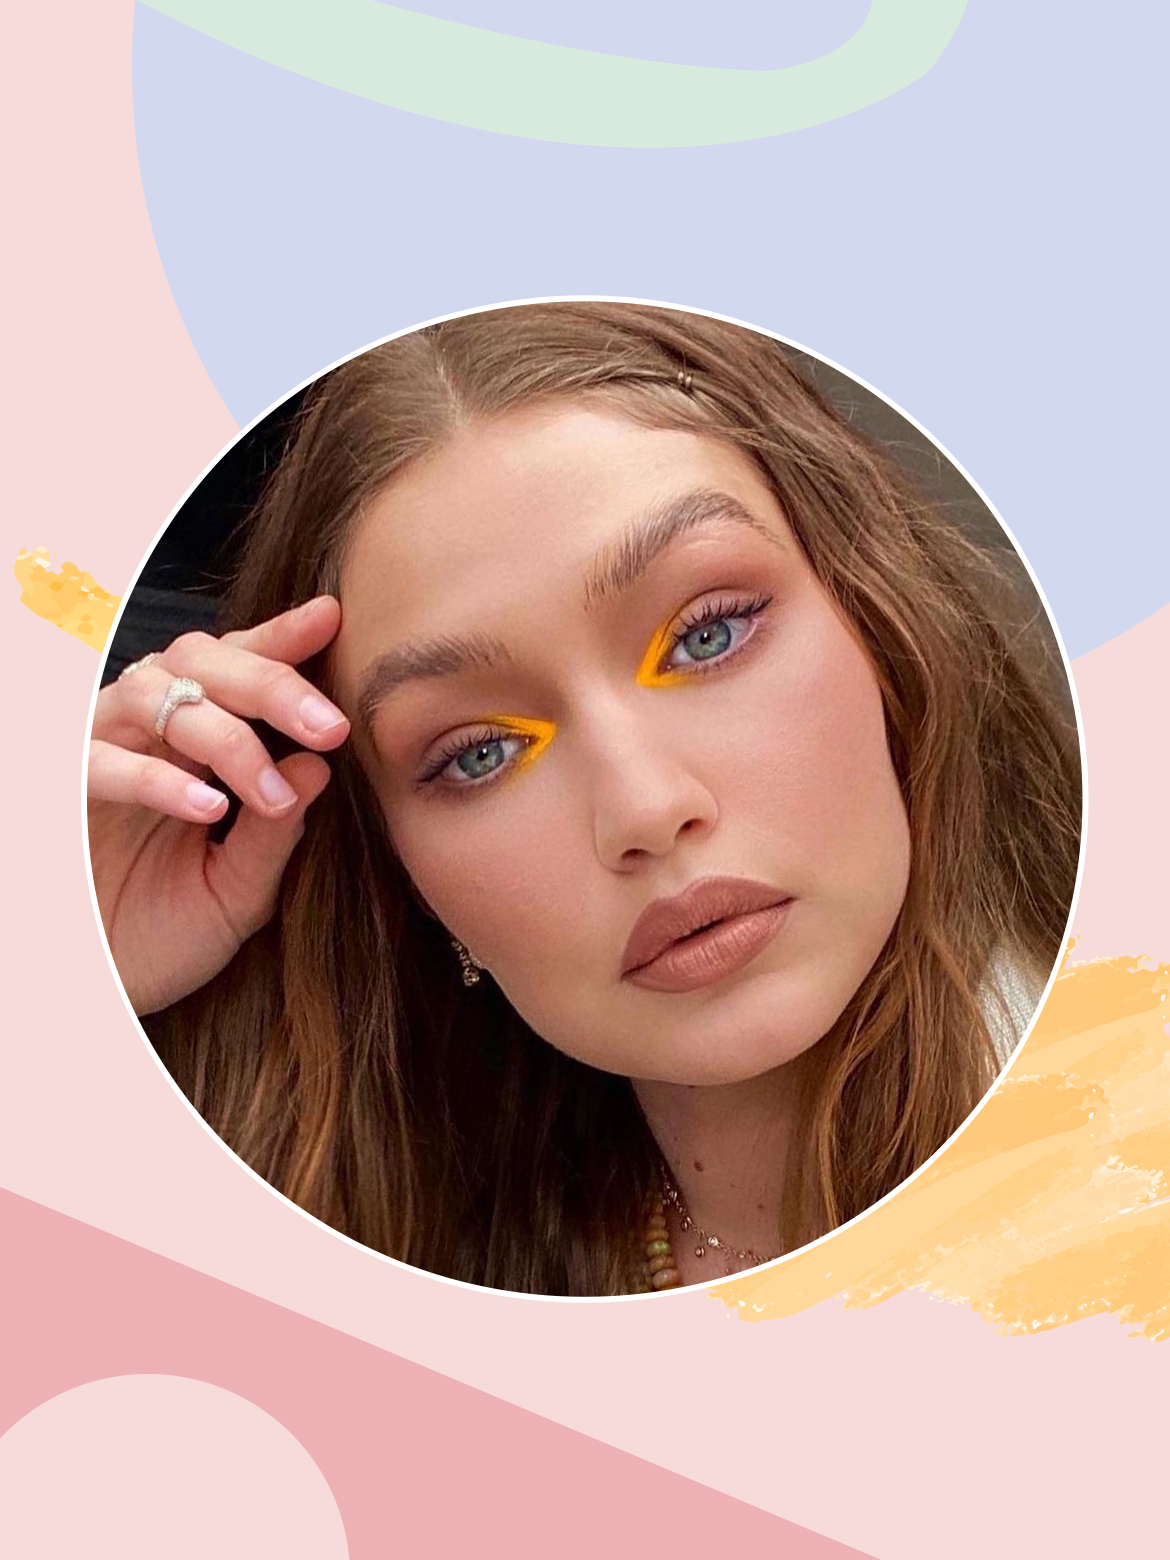 How To Wear A Graphic Liner Like A Pro - SUGAR Cosmetics